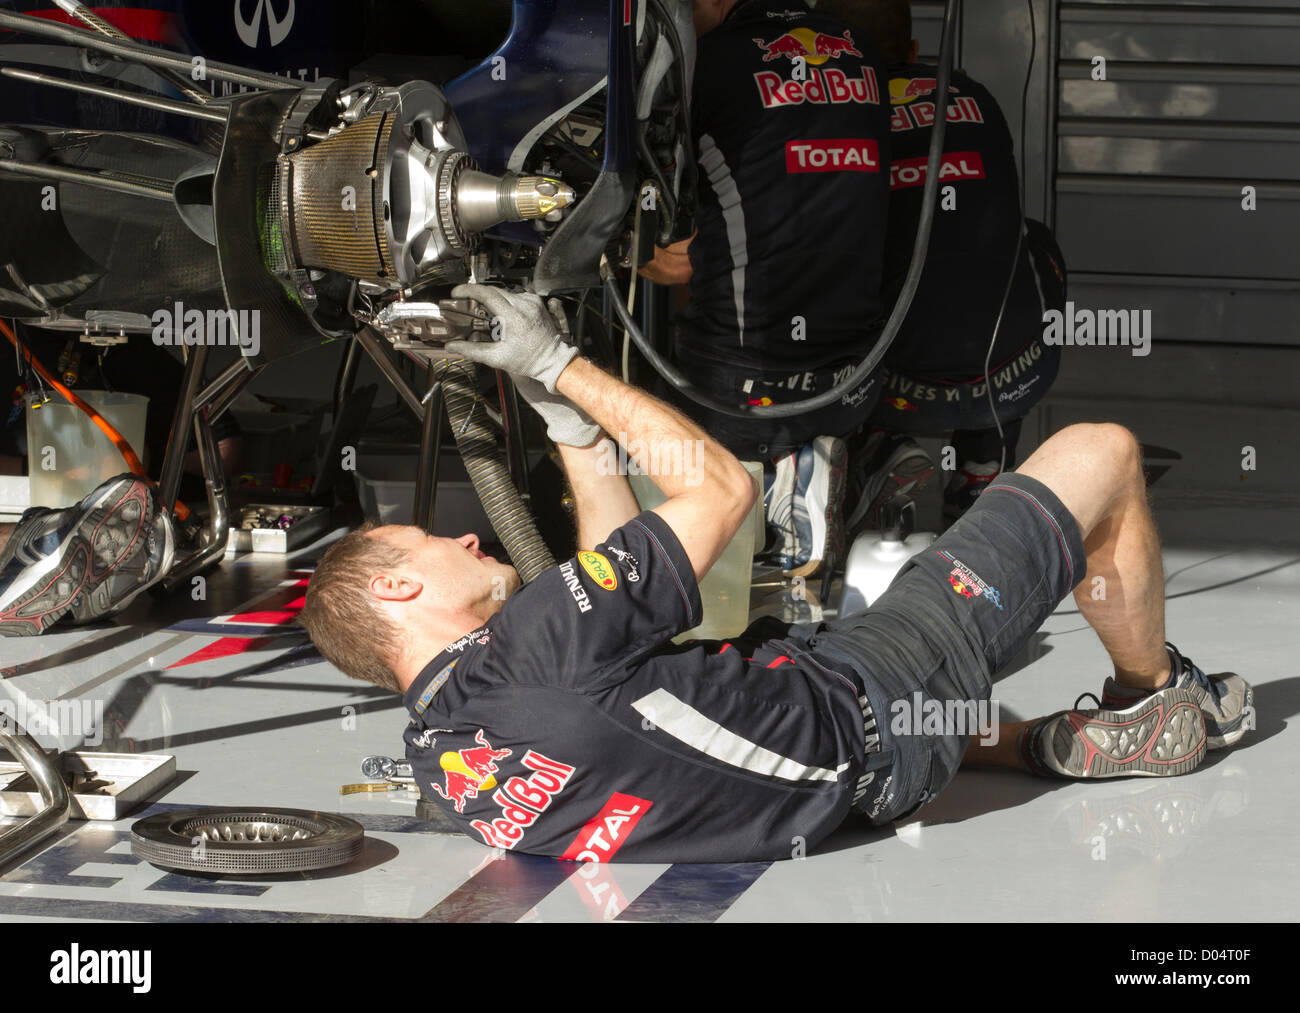 A mechanic works on the brakes of Sebastain Vettel's race car before the F1 United States Grand Prix at Circuit of the Americas Stock Photo